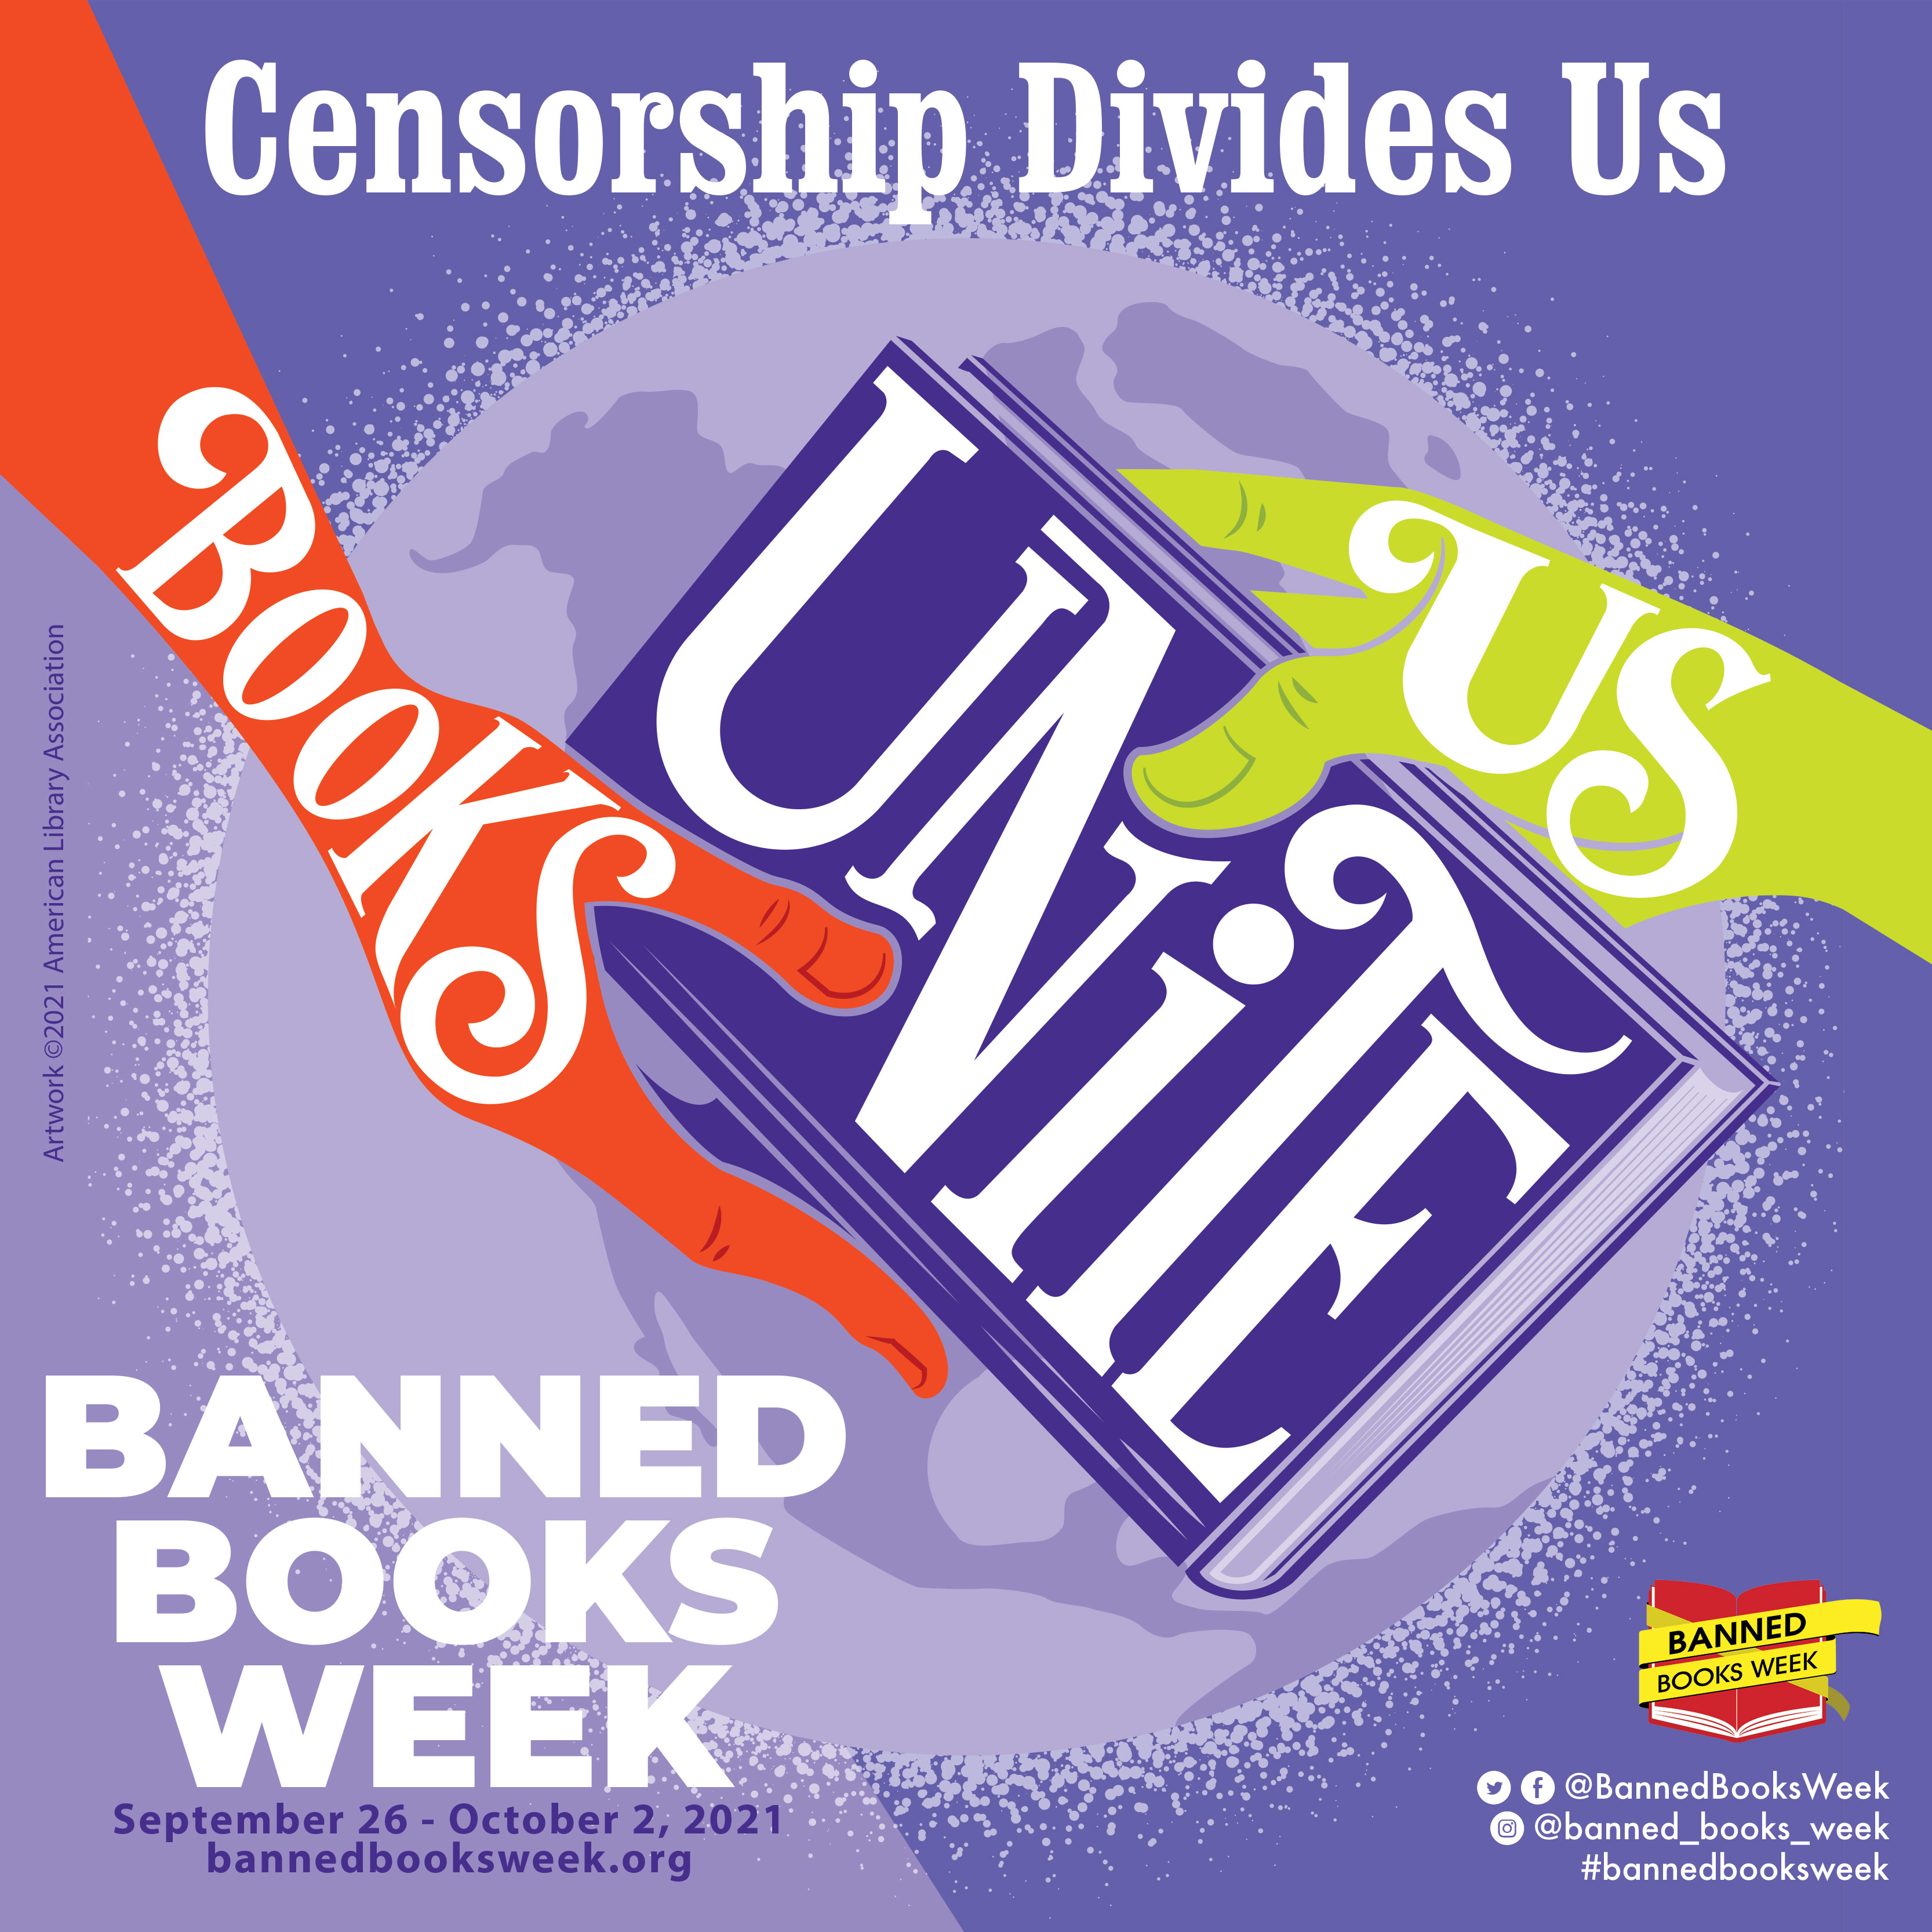 banned book week promo flyer